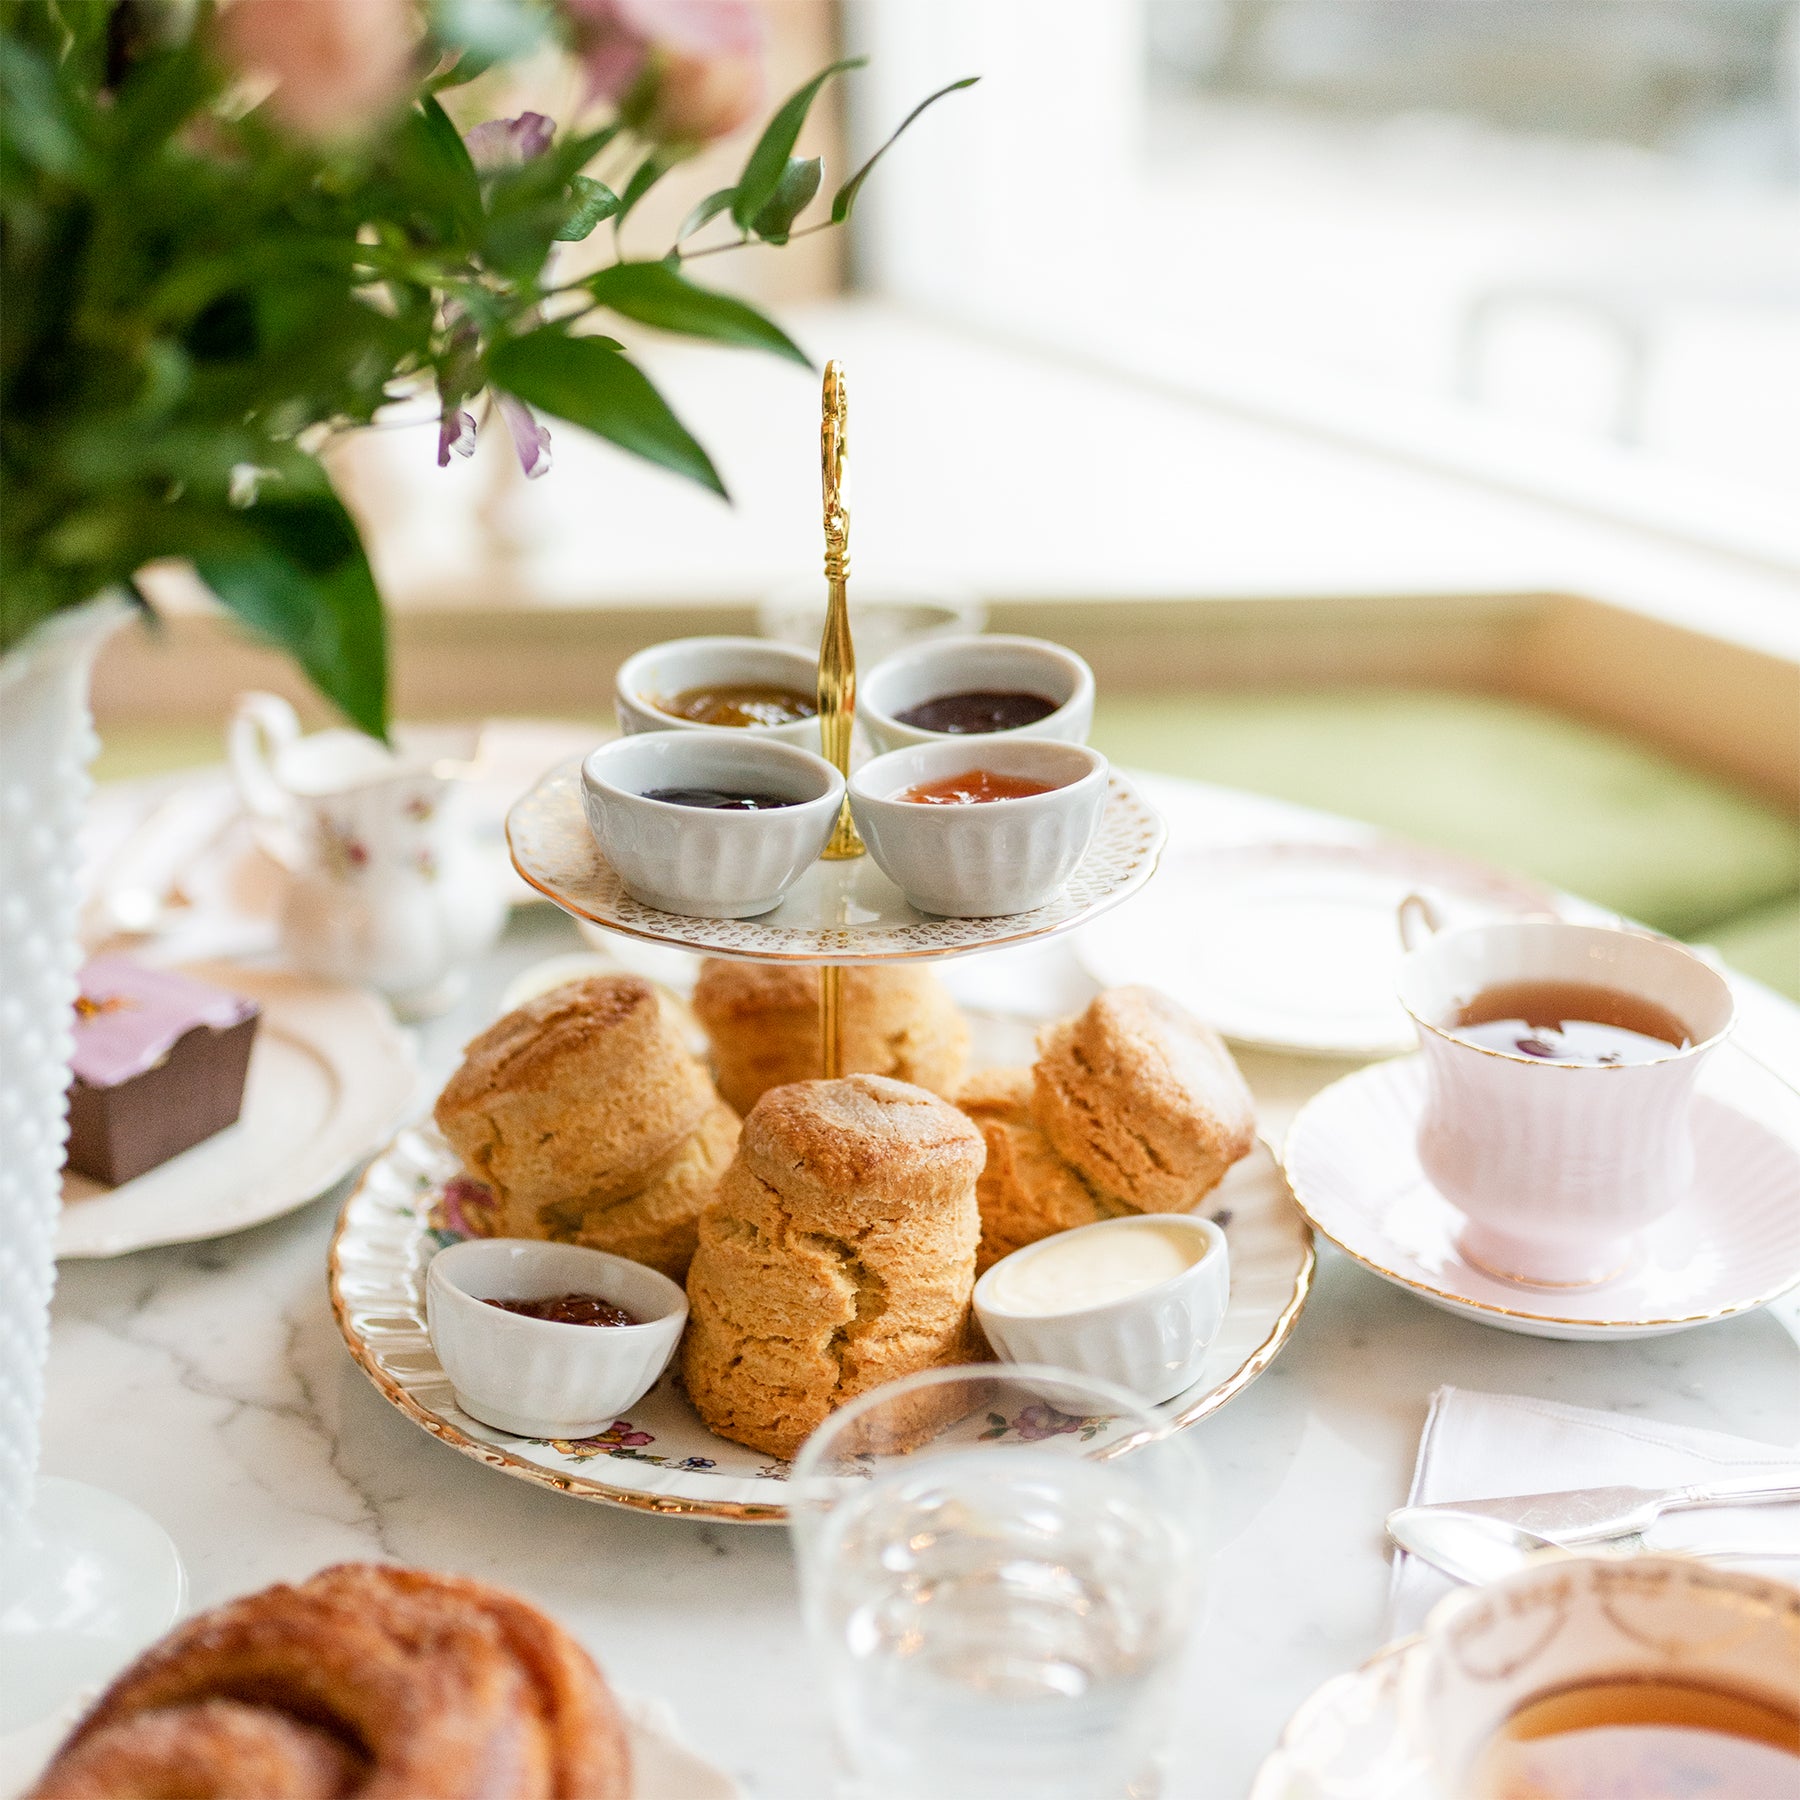 The tea service scene at Kitten and the Bear shows a table, with a two-tiered display. There are four preserves on the top tier and four scones on the bottom tier along with another preserve and clotted cream in ramekins. 